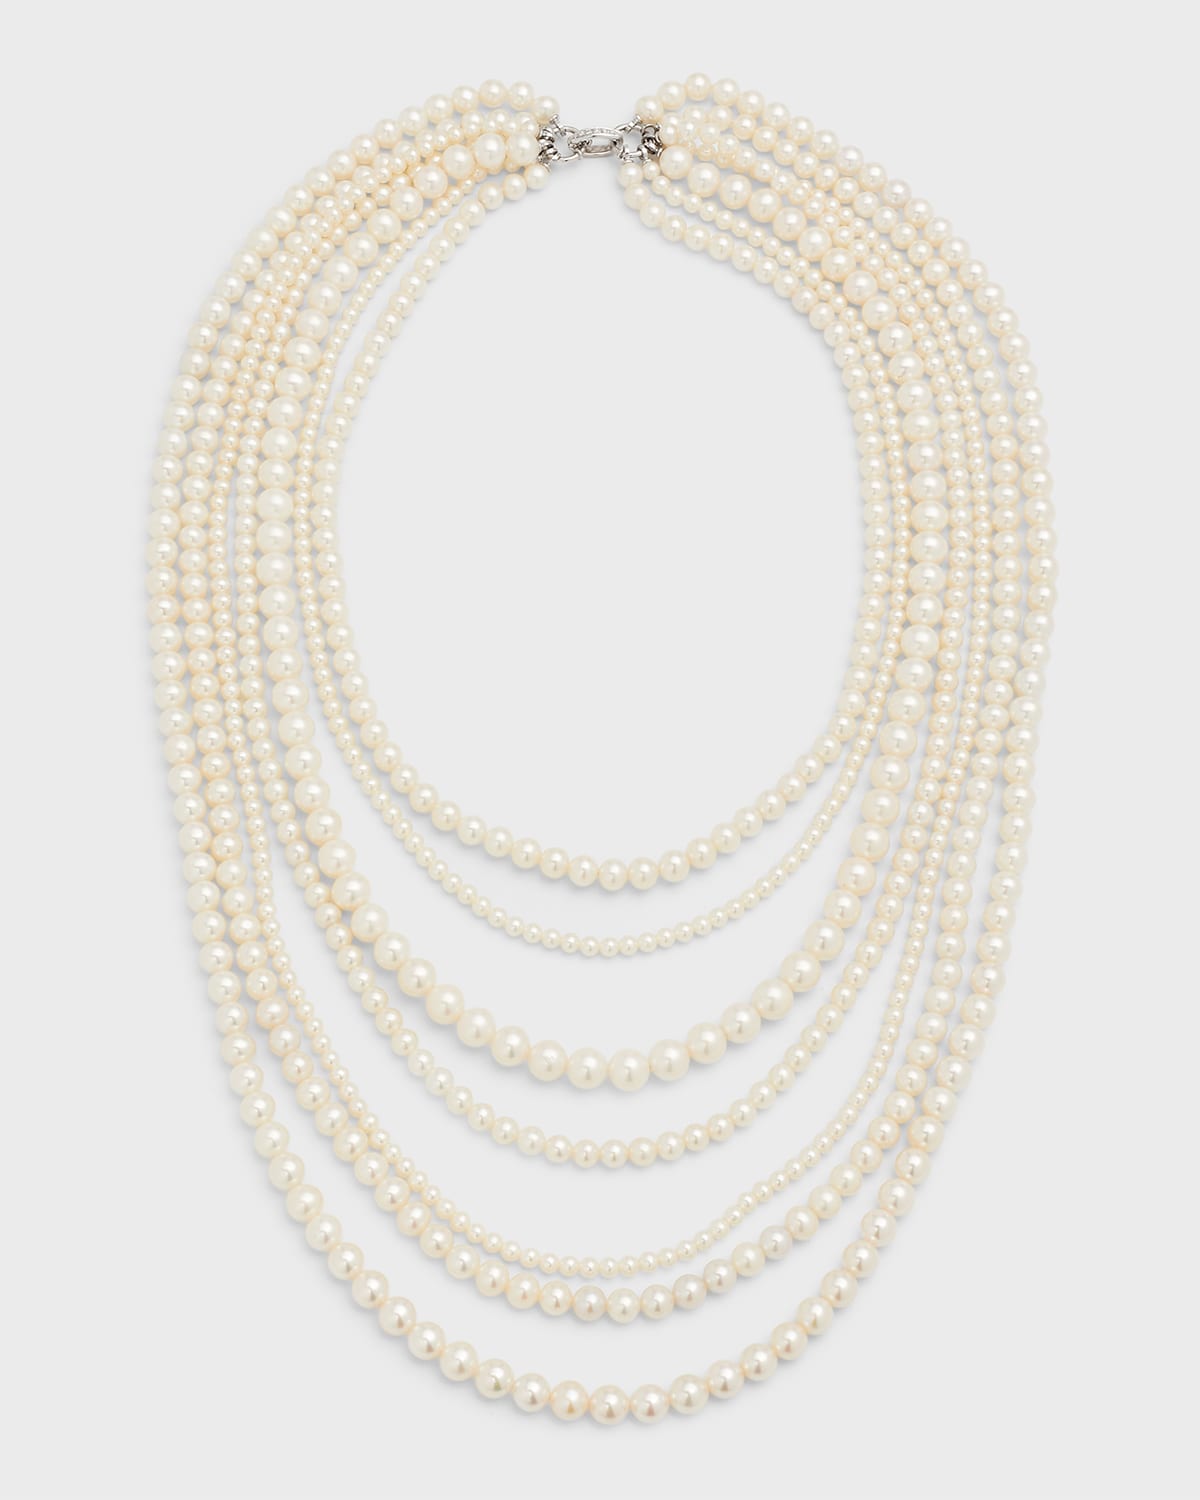 18K White Gold Necklace with Freshwater Pearls, 3.5-8.5mm